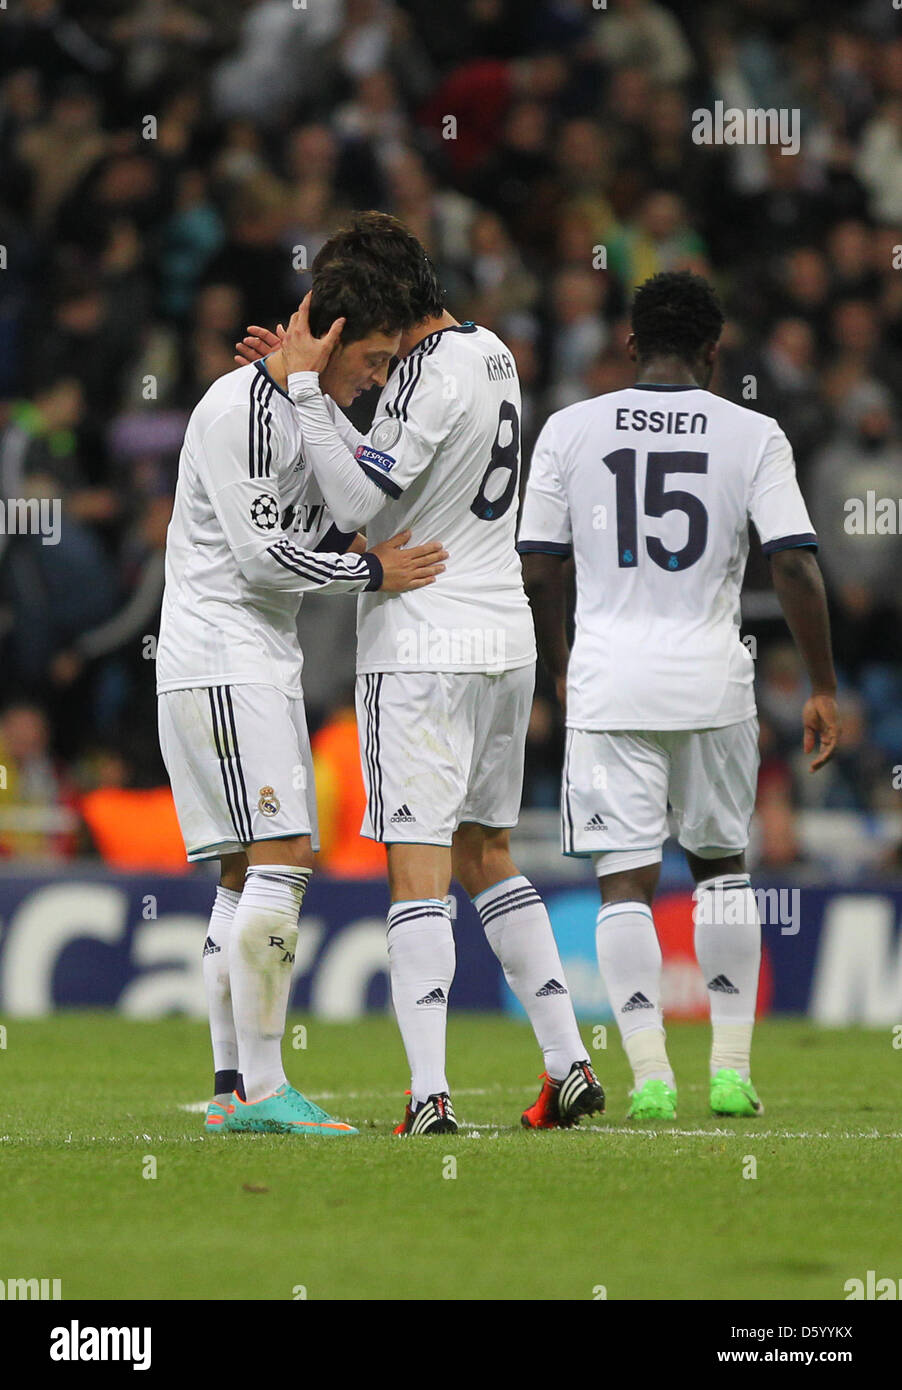 Real Madrid's Mesut Oezil (l) celebrates his 2-2 with Kaka (C) and Michael Essien during the Champions League Group D soccer match between Real Madrid and Borussia Dortmund at the Santiago Bernabeu Stadium in Madrid, Spain, 6 November 2012. Photo: Fabian Stratenschulte/dpa  +++(c) dpa - Bildfunk+++ Stock Photo